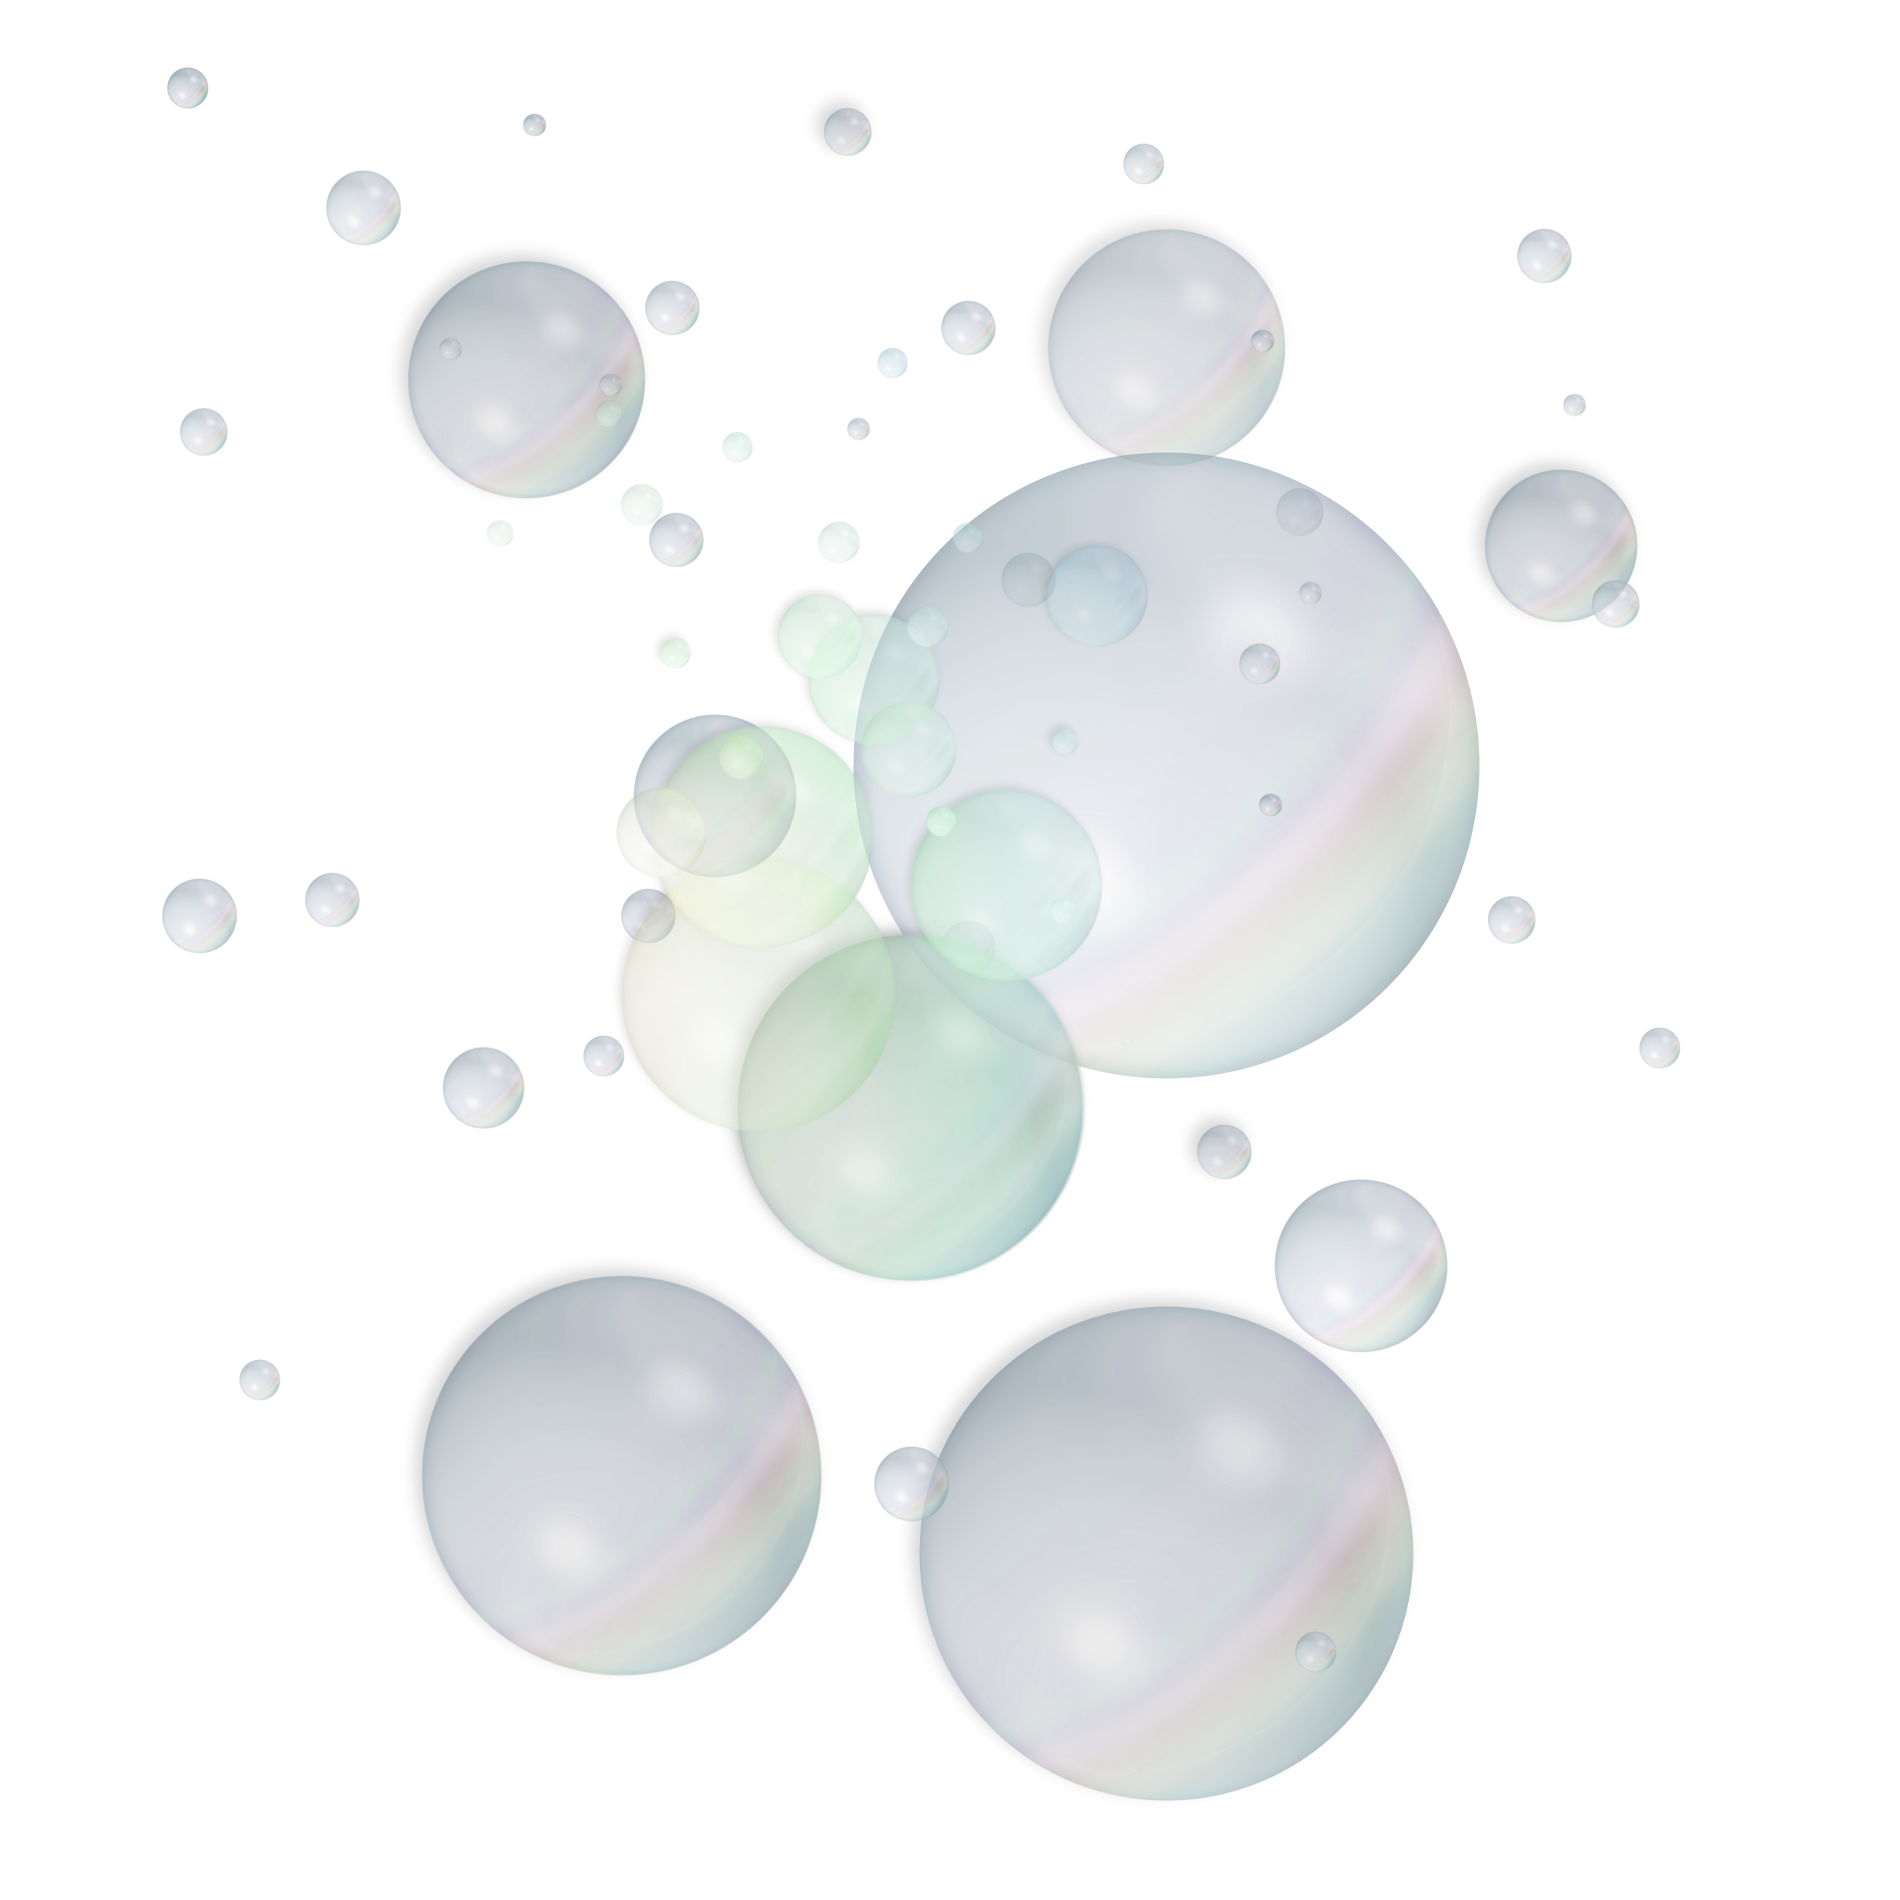 Hd Bubble Png Transparent Background Free Download 44342 Freeiconspng